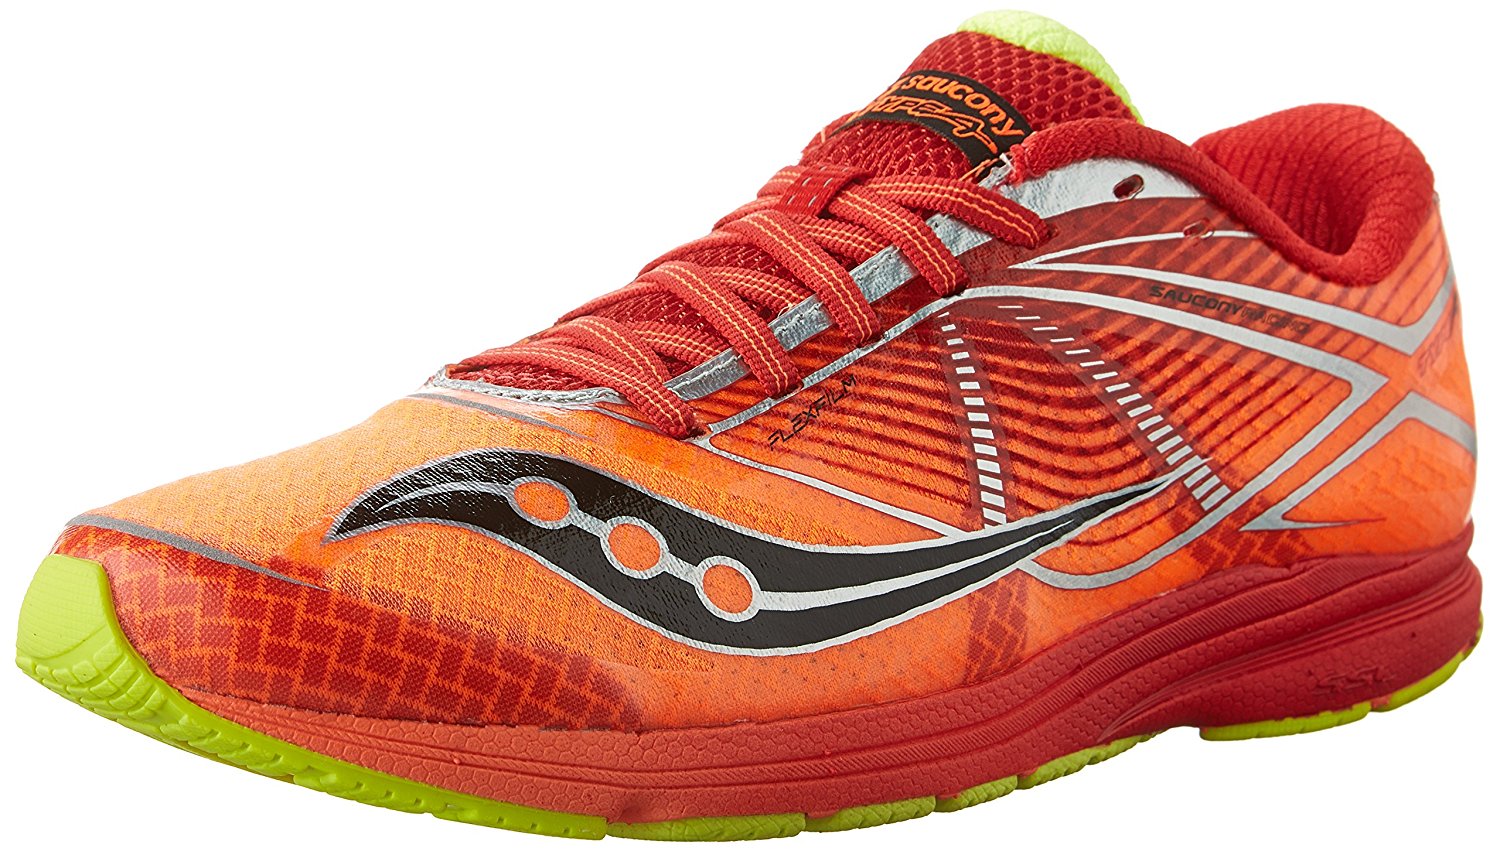 Saucony Type A6 Tested for Performance 